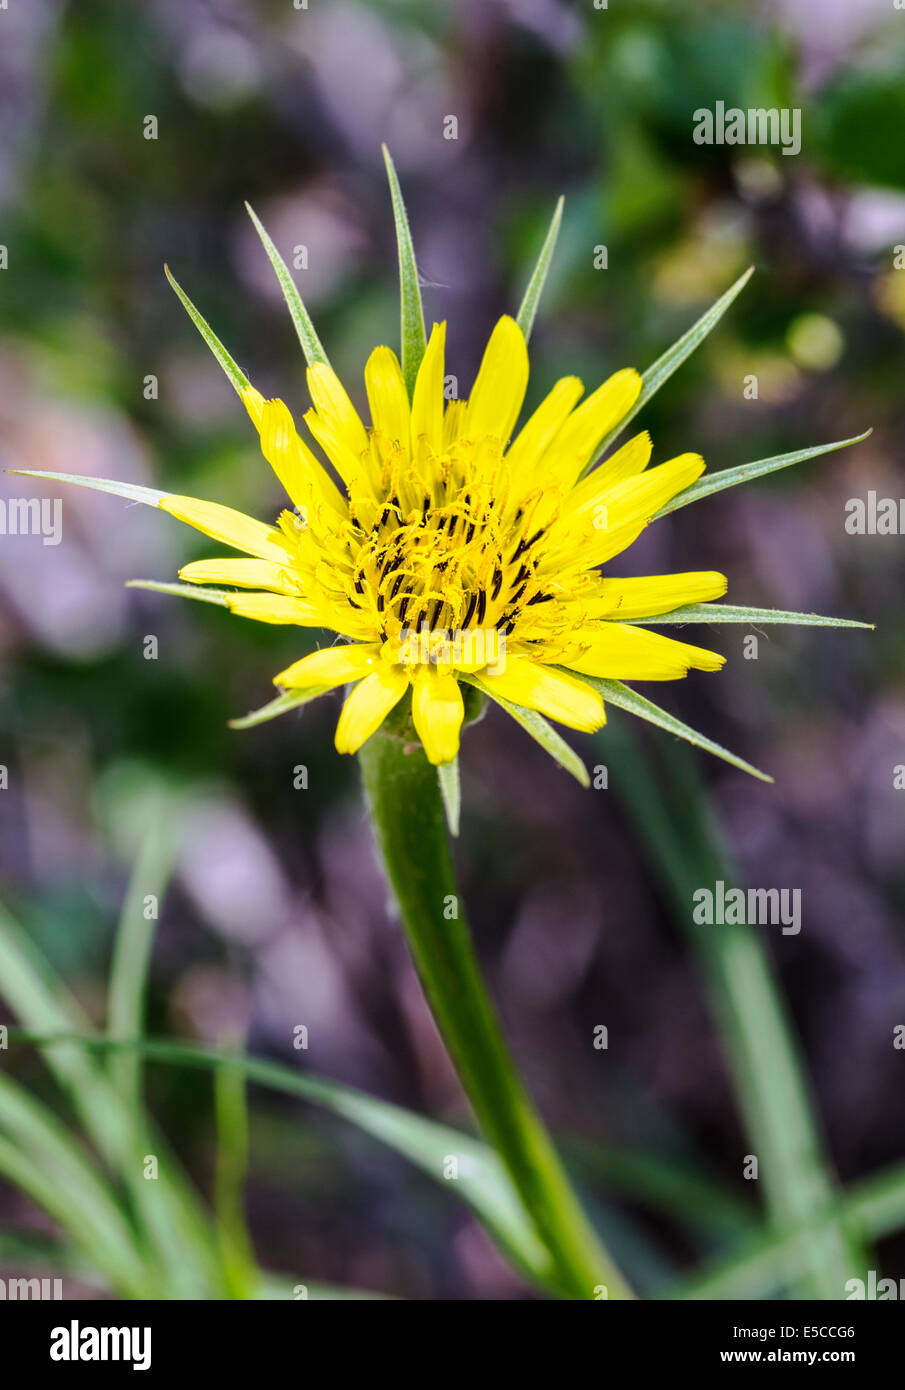 Tragopogon dubius; Yellow Salsify; Asteraceae; Sunflower; wildflowers in bloom, Central Colorado, USA Stock Photo